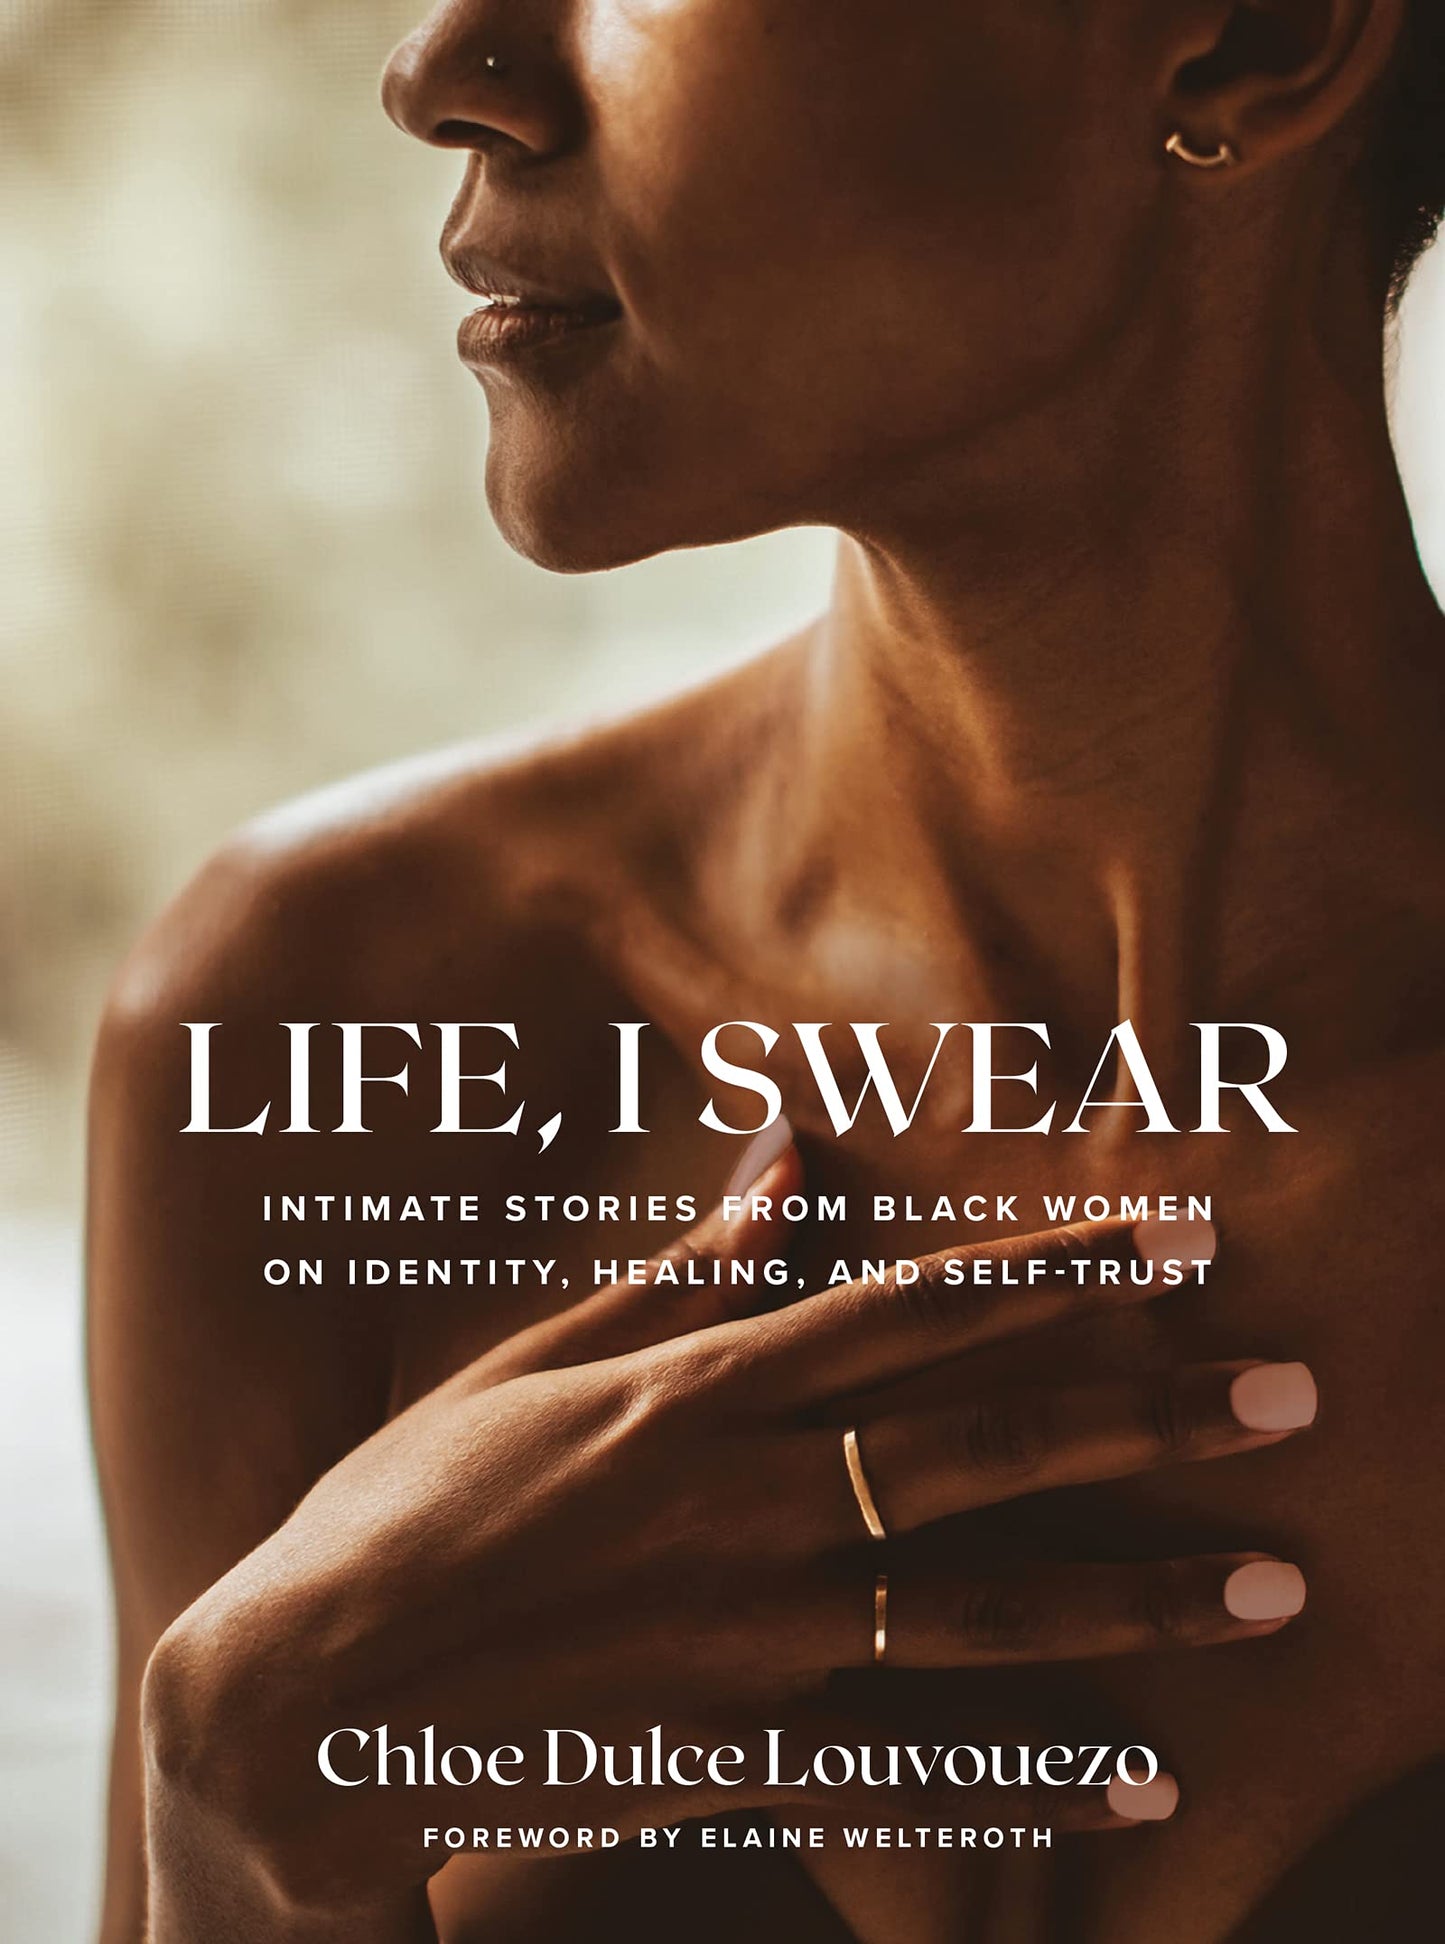 Life, I Swear // Intimate Stories from Black Women on Identity, Healing, and Self-Trust